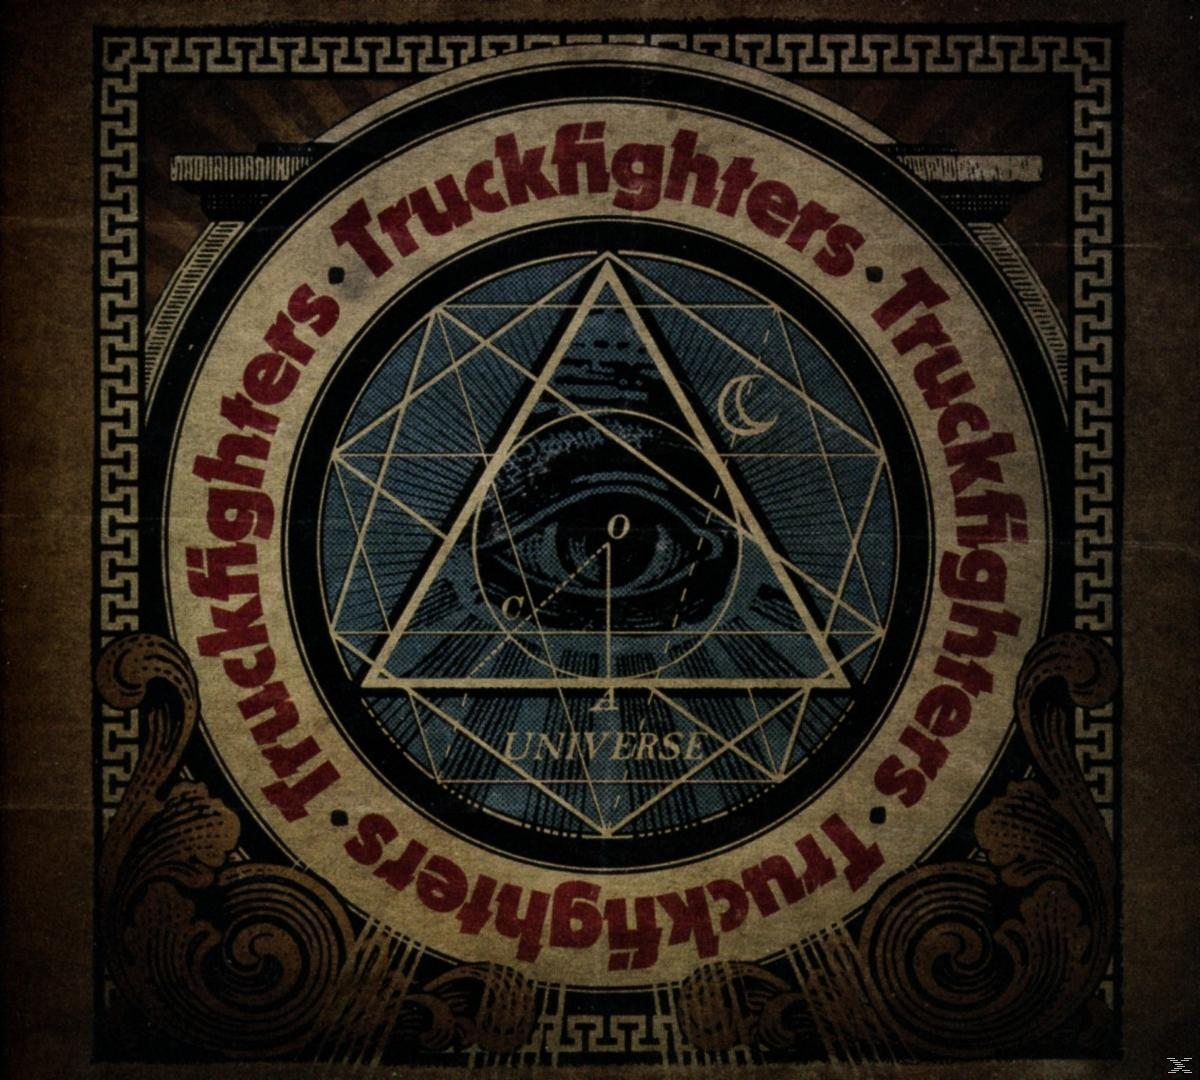 Truckfighters - (CD) - Universe